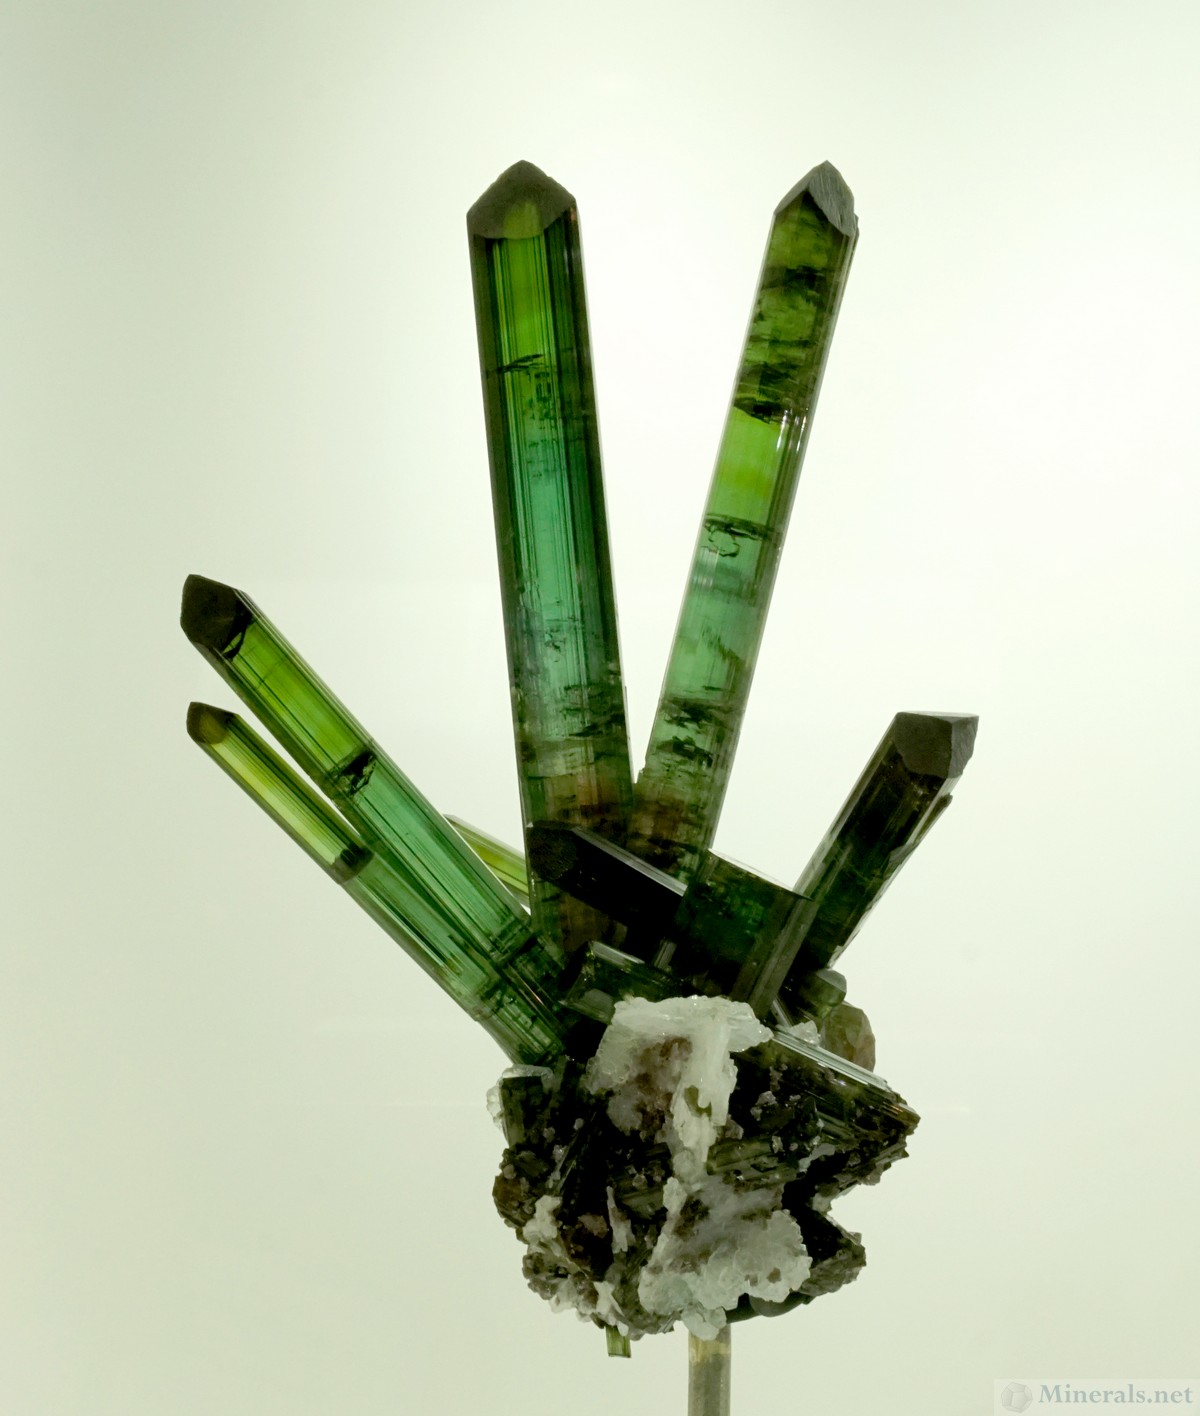 Another Exquisite Tourmaline Hand, most likely from Pederneira Mine, Minas Gerais, Brazil, Naturalcrationsmineralco.com